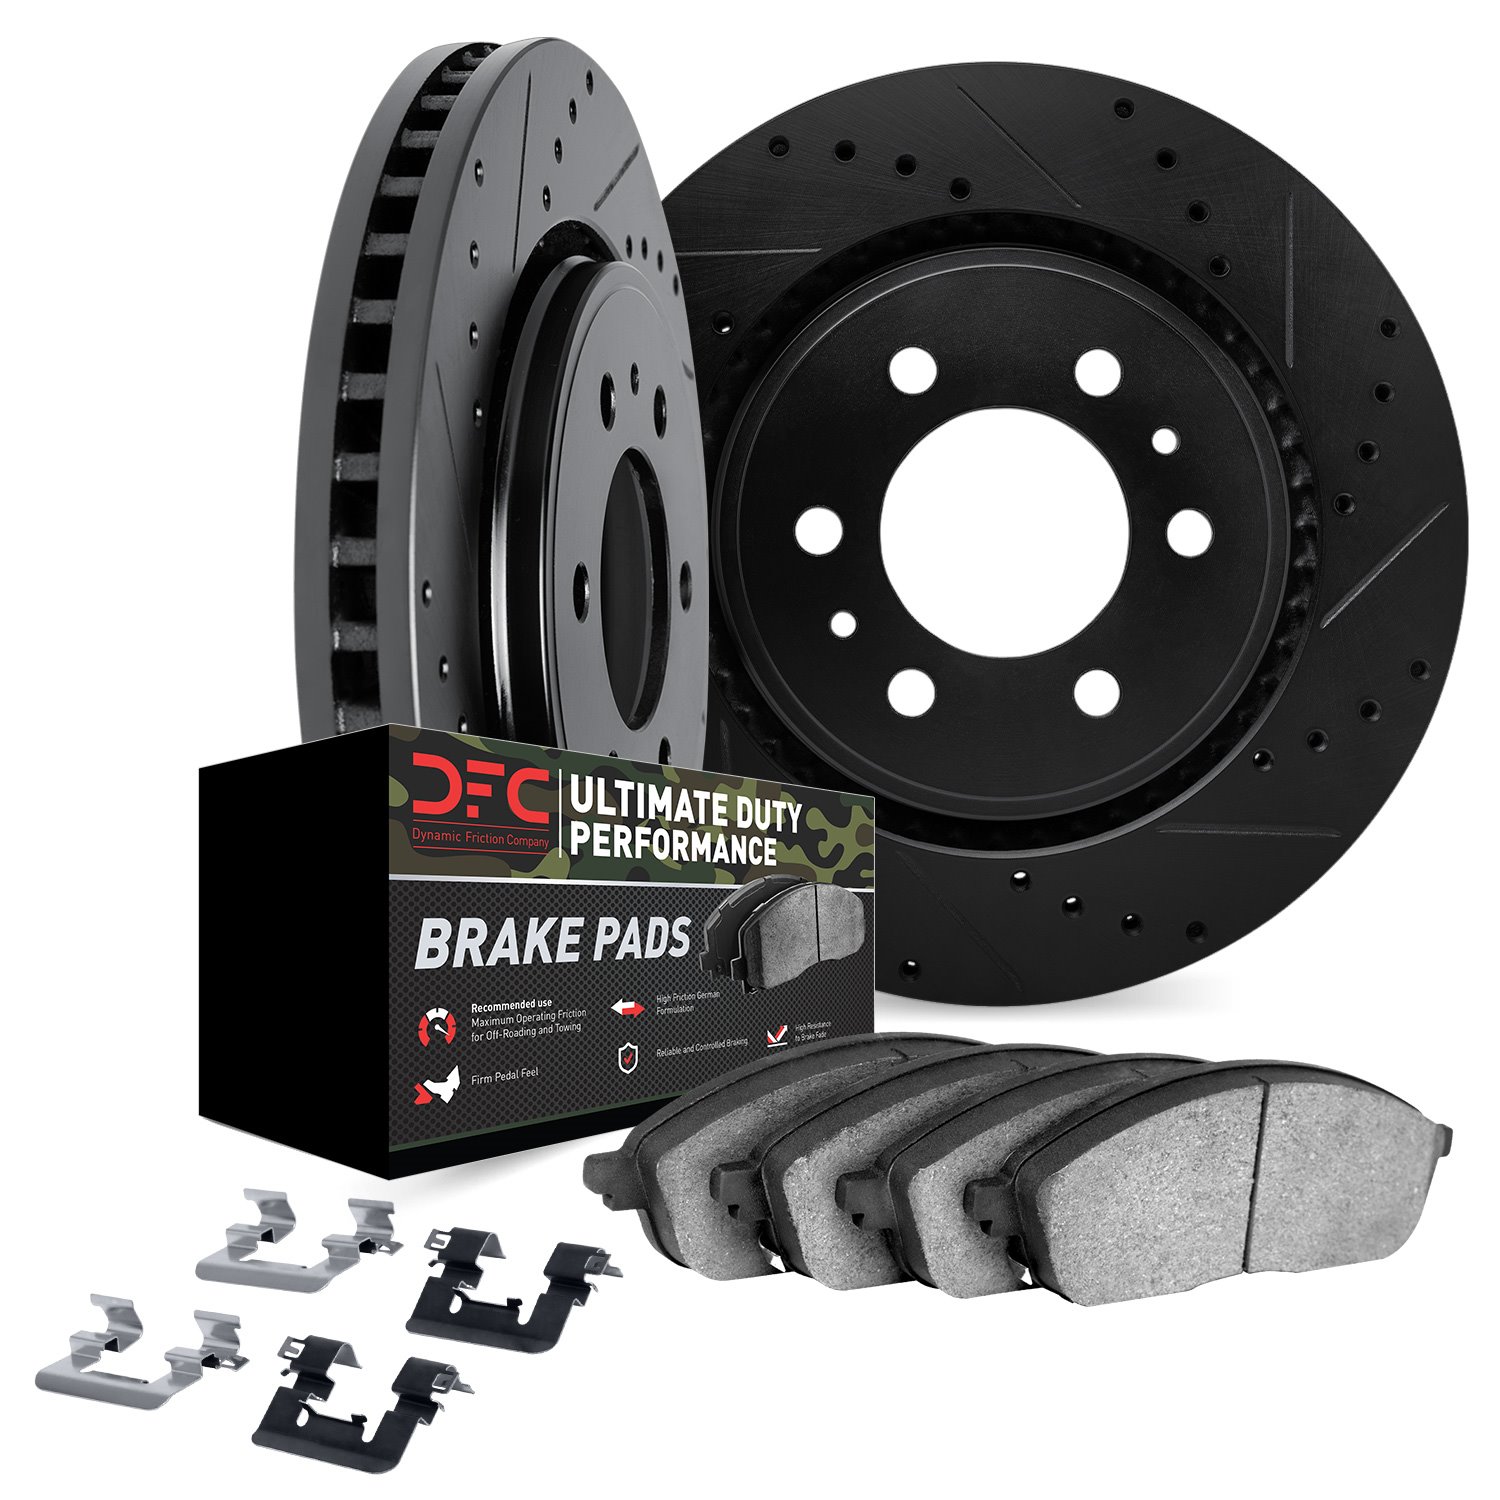 8412-67009 Drilled/Slotted Brake Rotors with Ultimate-Duty Brake Pads Kit & Hardware [Black], Fits Select Infiniti/Nissan, Posit